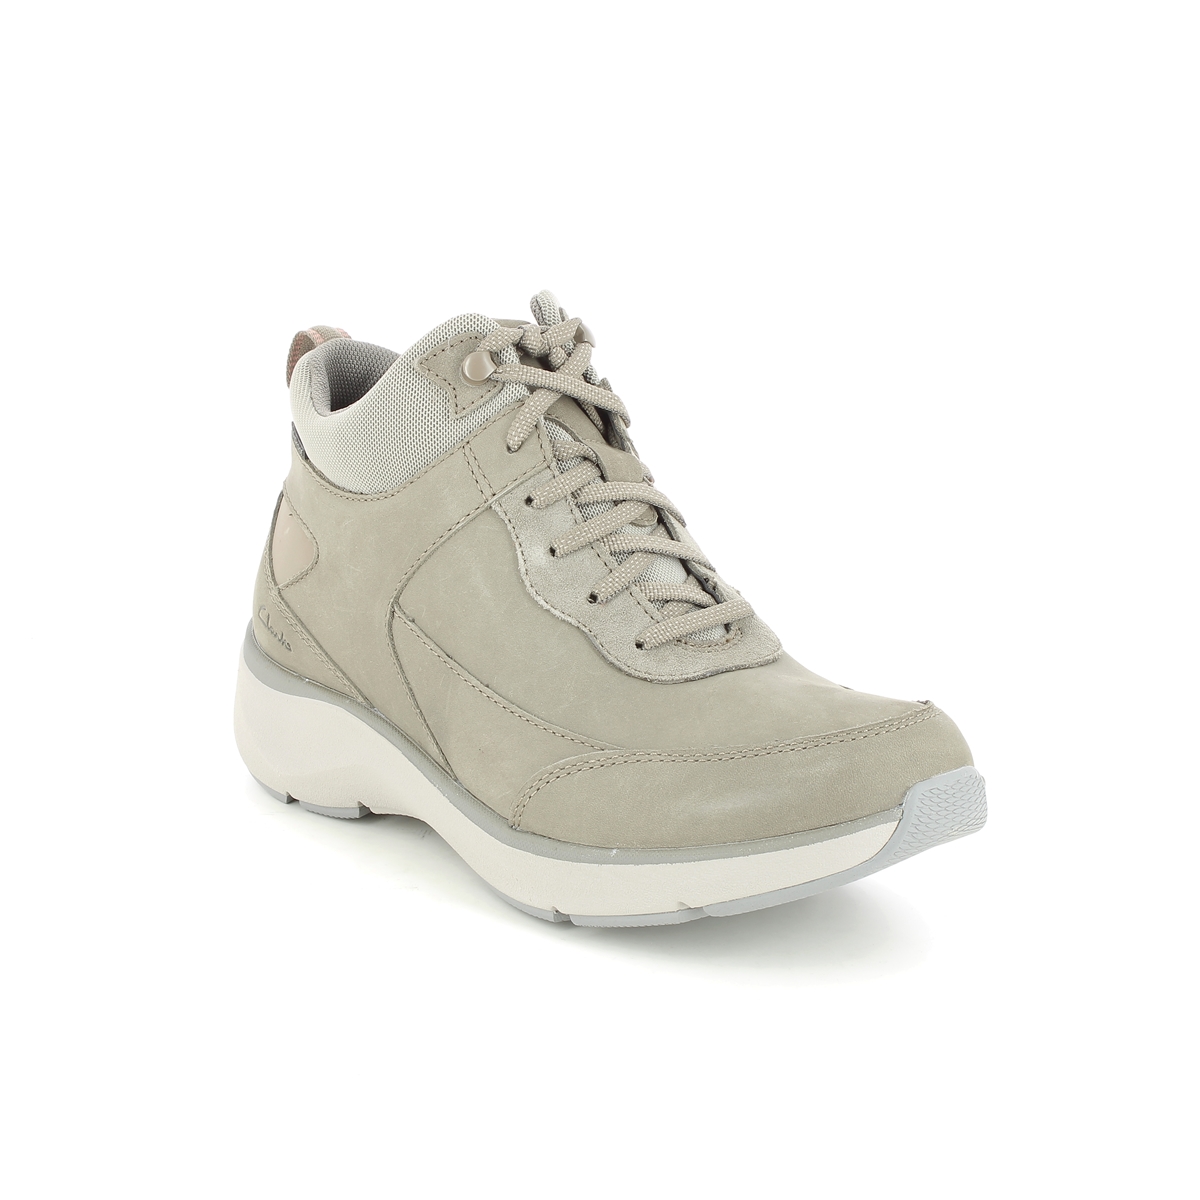 Clarks Wave 2 Mid Tex Taupe Nubuck Womens Walking Boots 536585E In Size 5.5 In Plain Taupe Nubuck E Width Fitting Narrow Fit